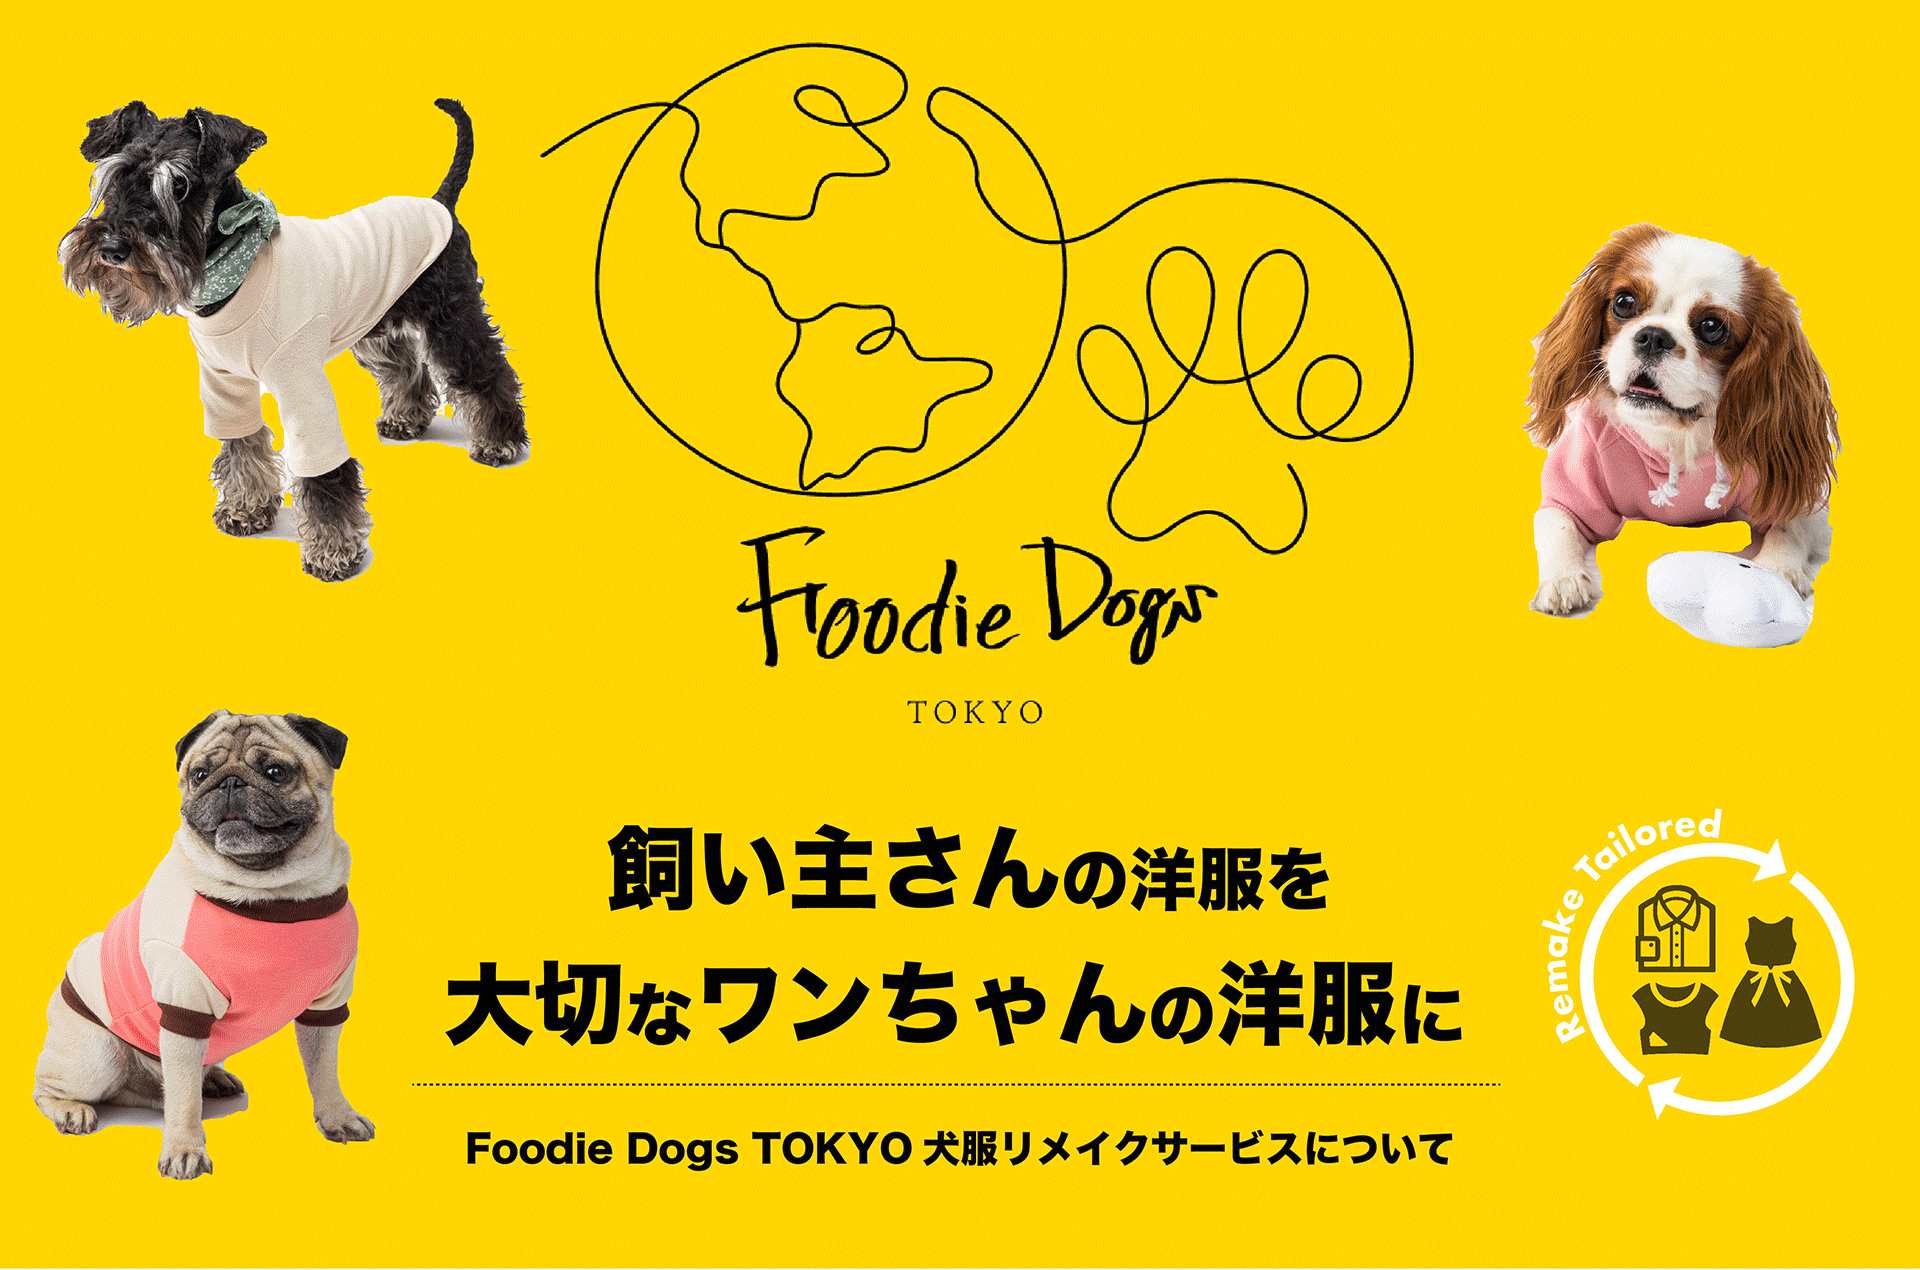 Foodie Dogs TOKYO犬服リメイクサービス